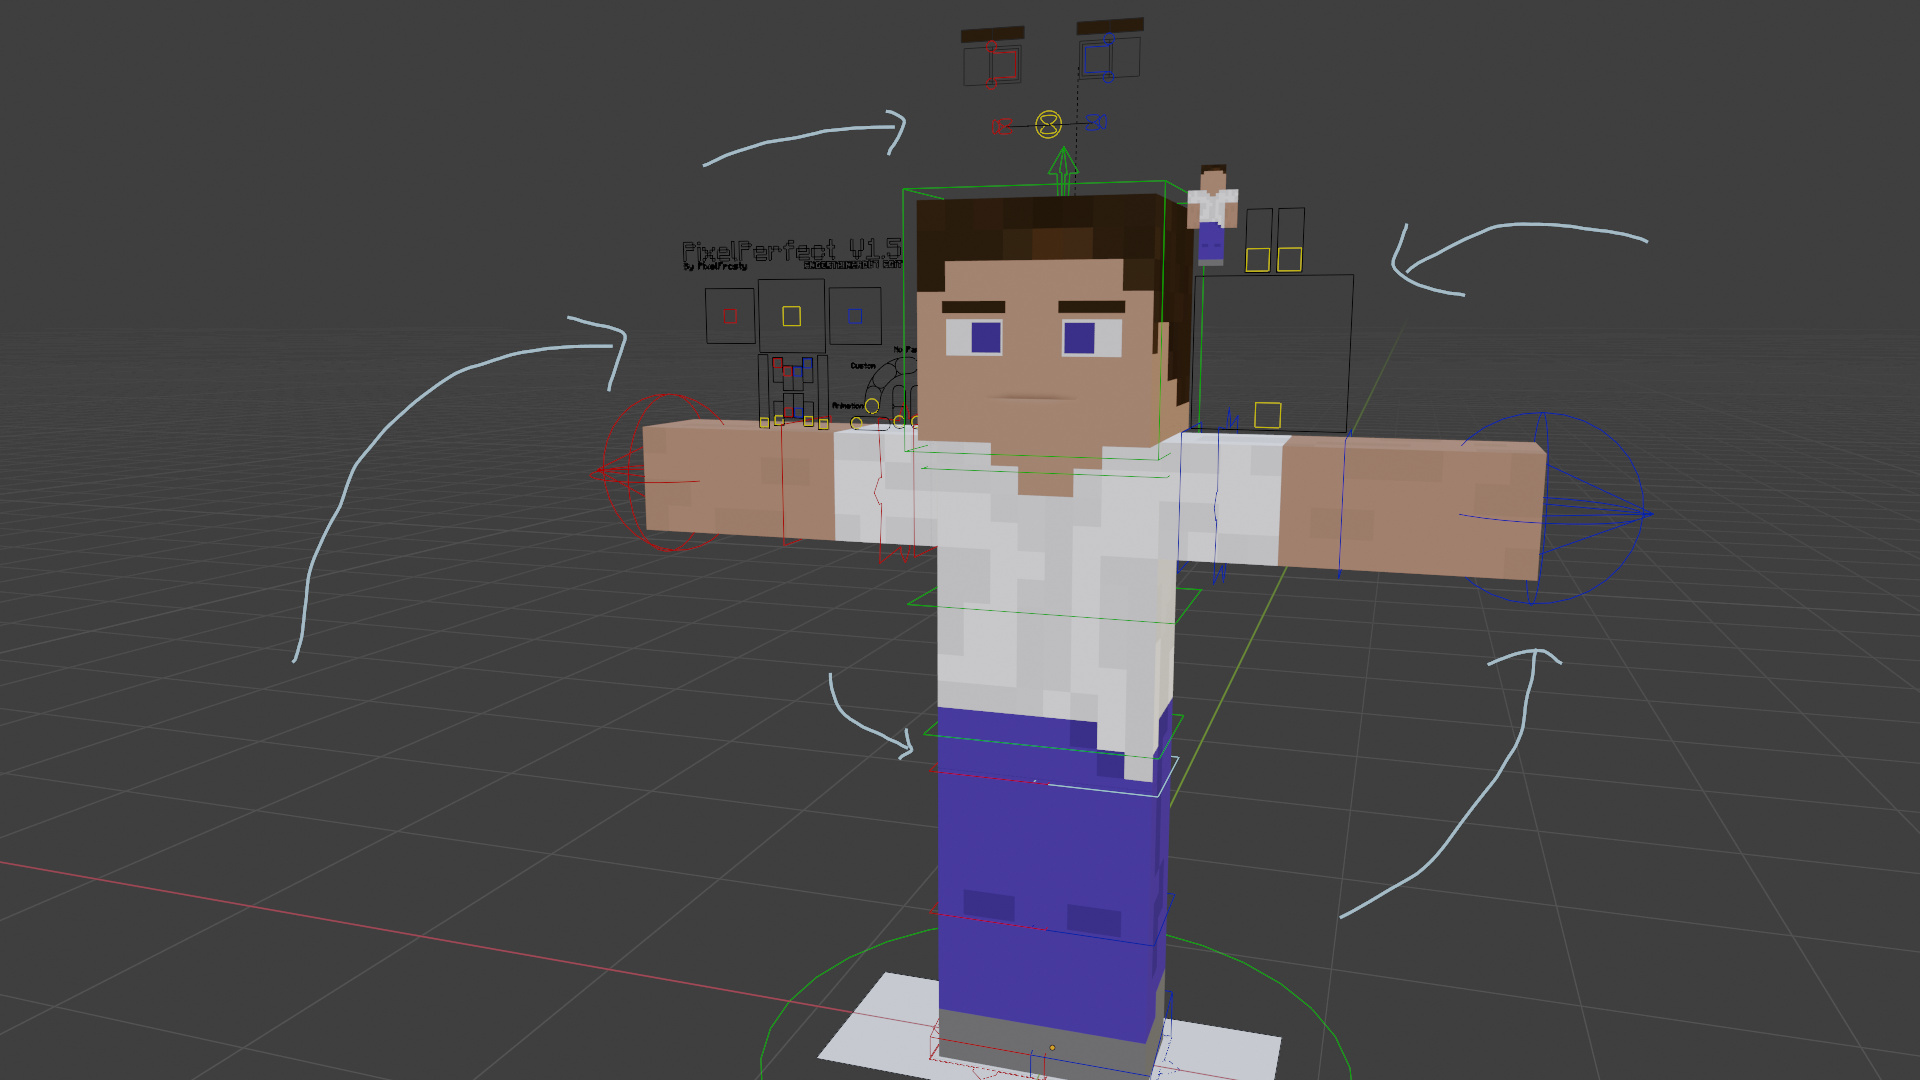 How to modify and add feature into minecraft rig? - Animation and Rigging - Blender Artists Community